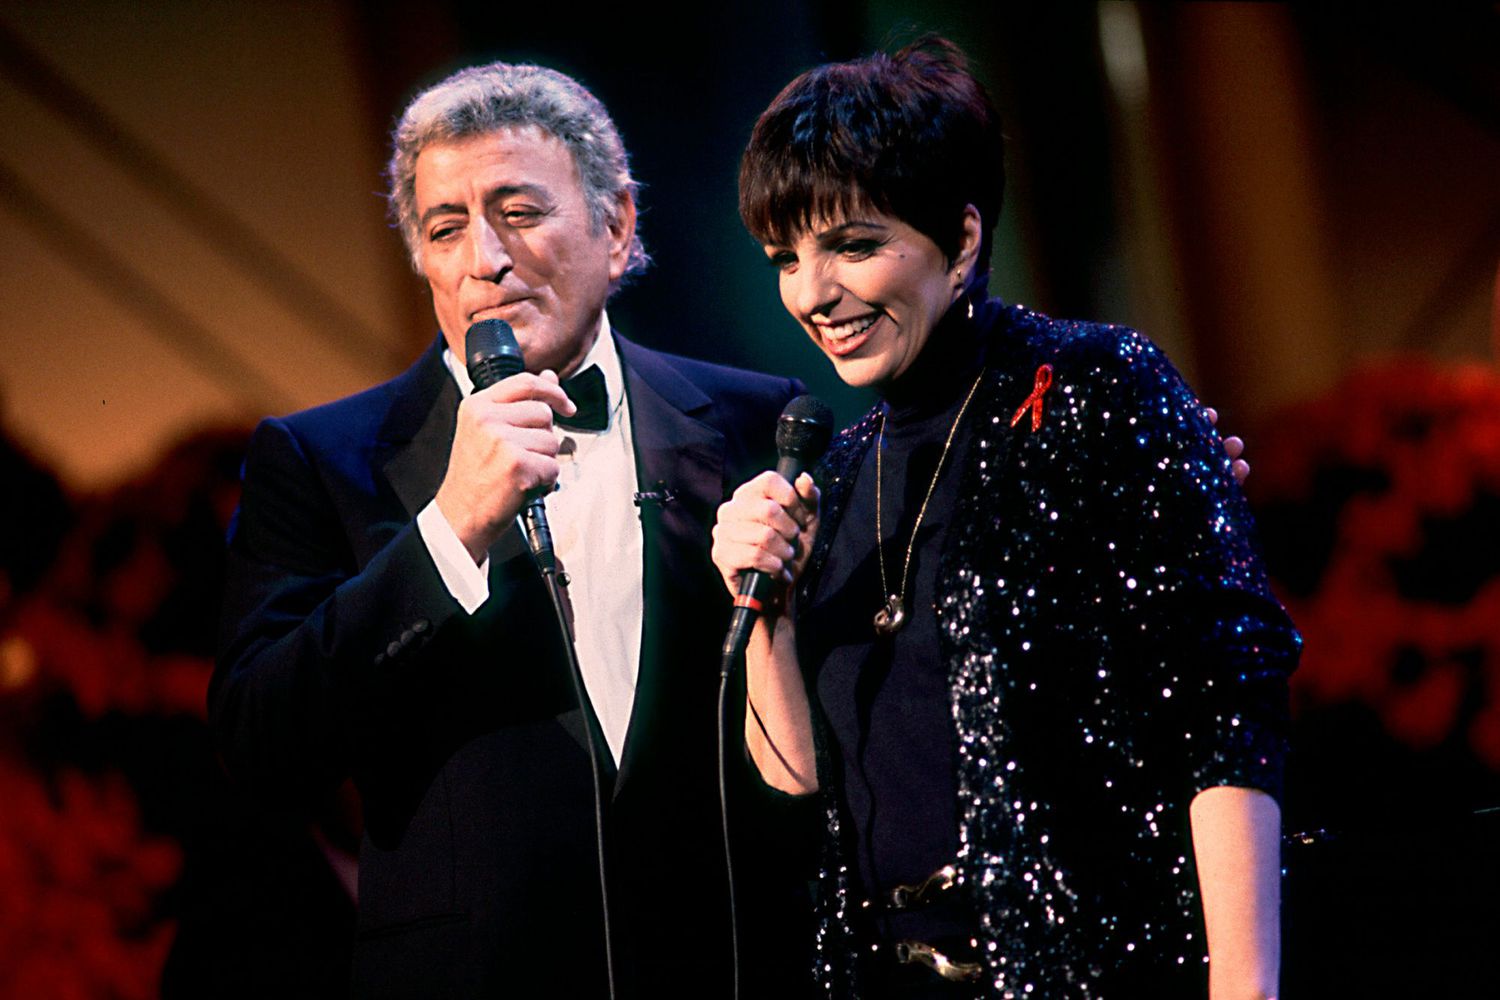 Liza Minnelli with Tony Bennett filming The Oprah Winfrey Show in Chicago on Dec. 12, 1992